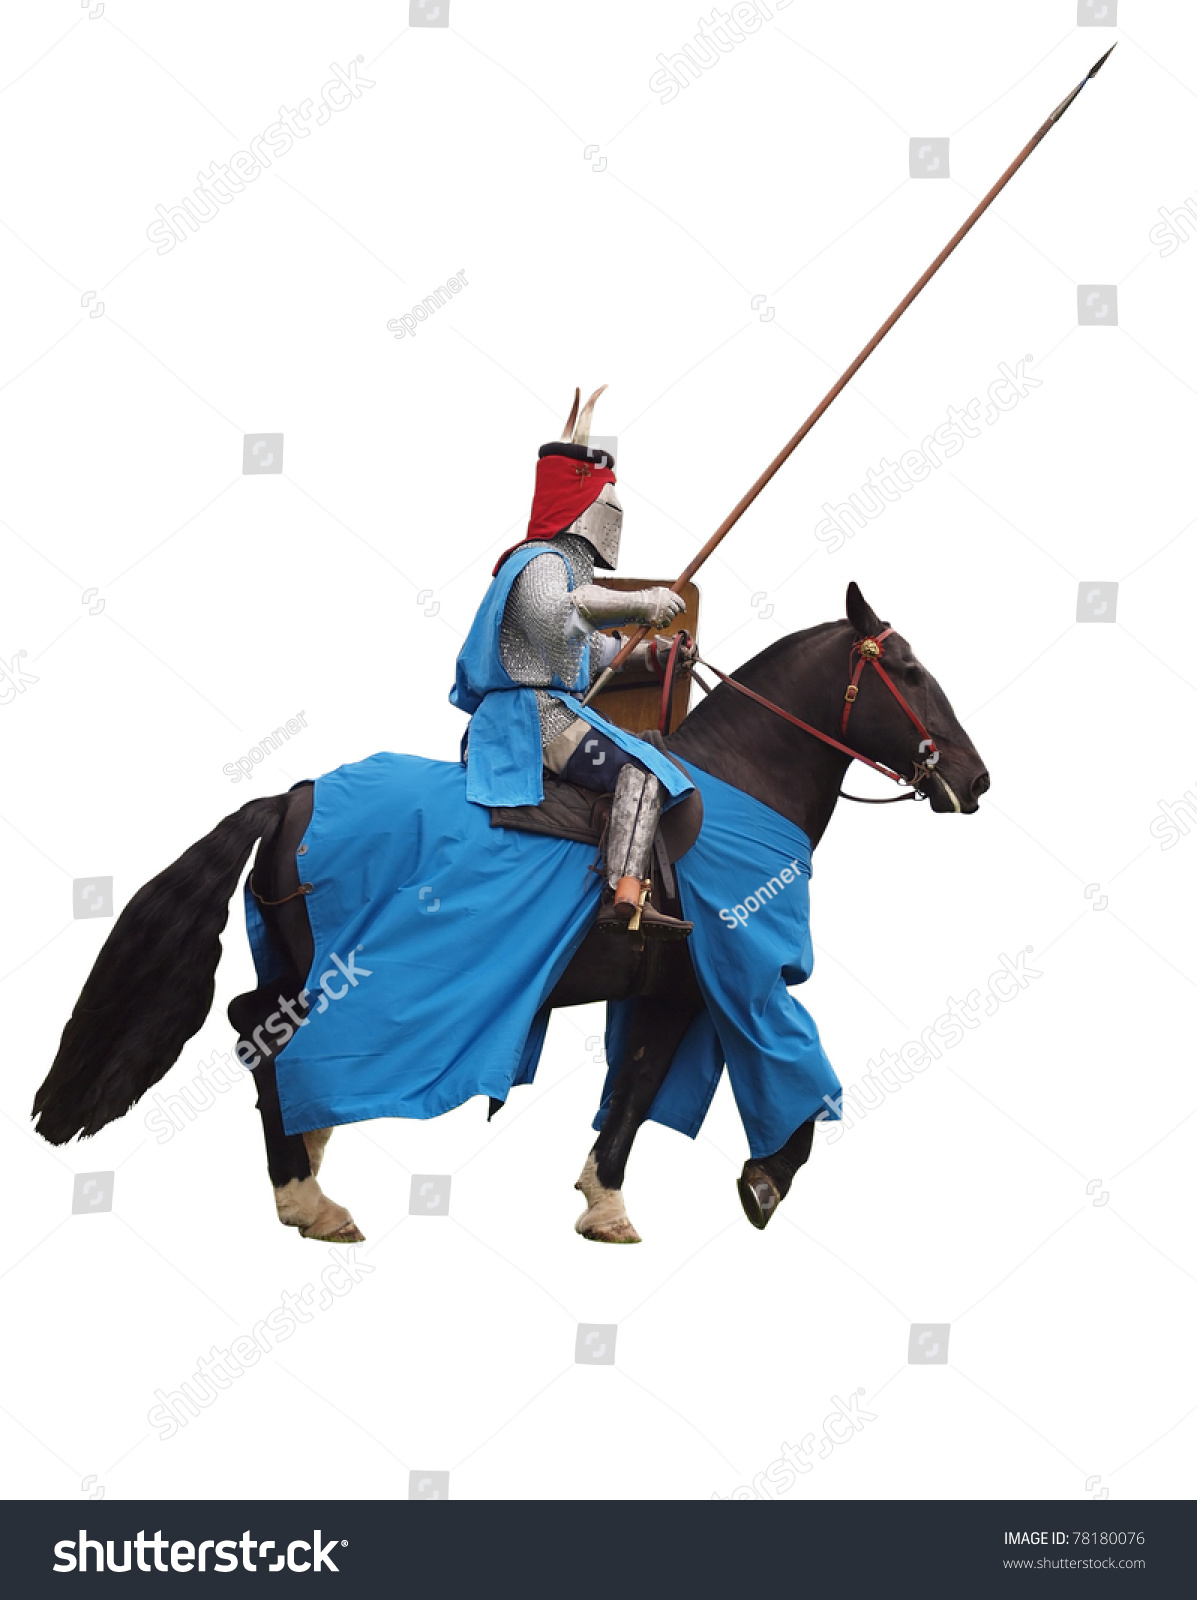 Armoured Medieval Knight On Horseback Charging With Lance - Isolated On